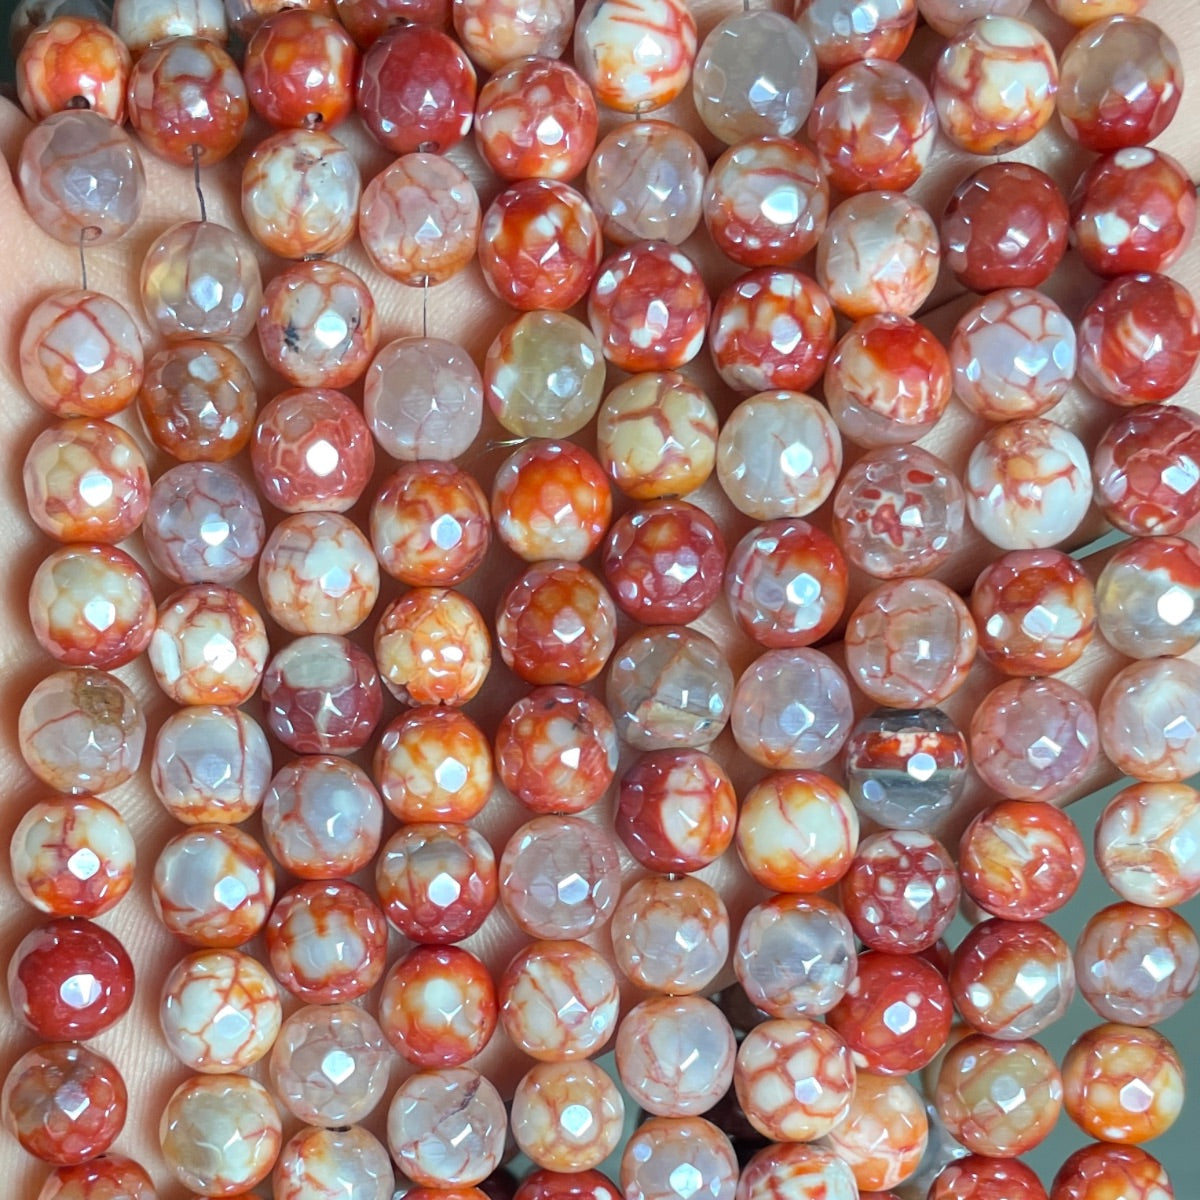 2 Strands/lot 8mm Electroplated Orange Fire Agate Faceted Stone Beads Electroplated Beads Electroplated Faceted Agate Beads New Beads Arrivals Charms Beads Beyond